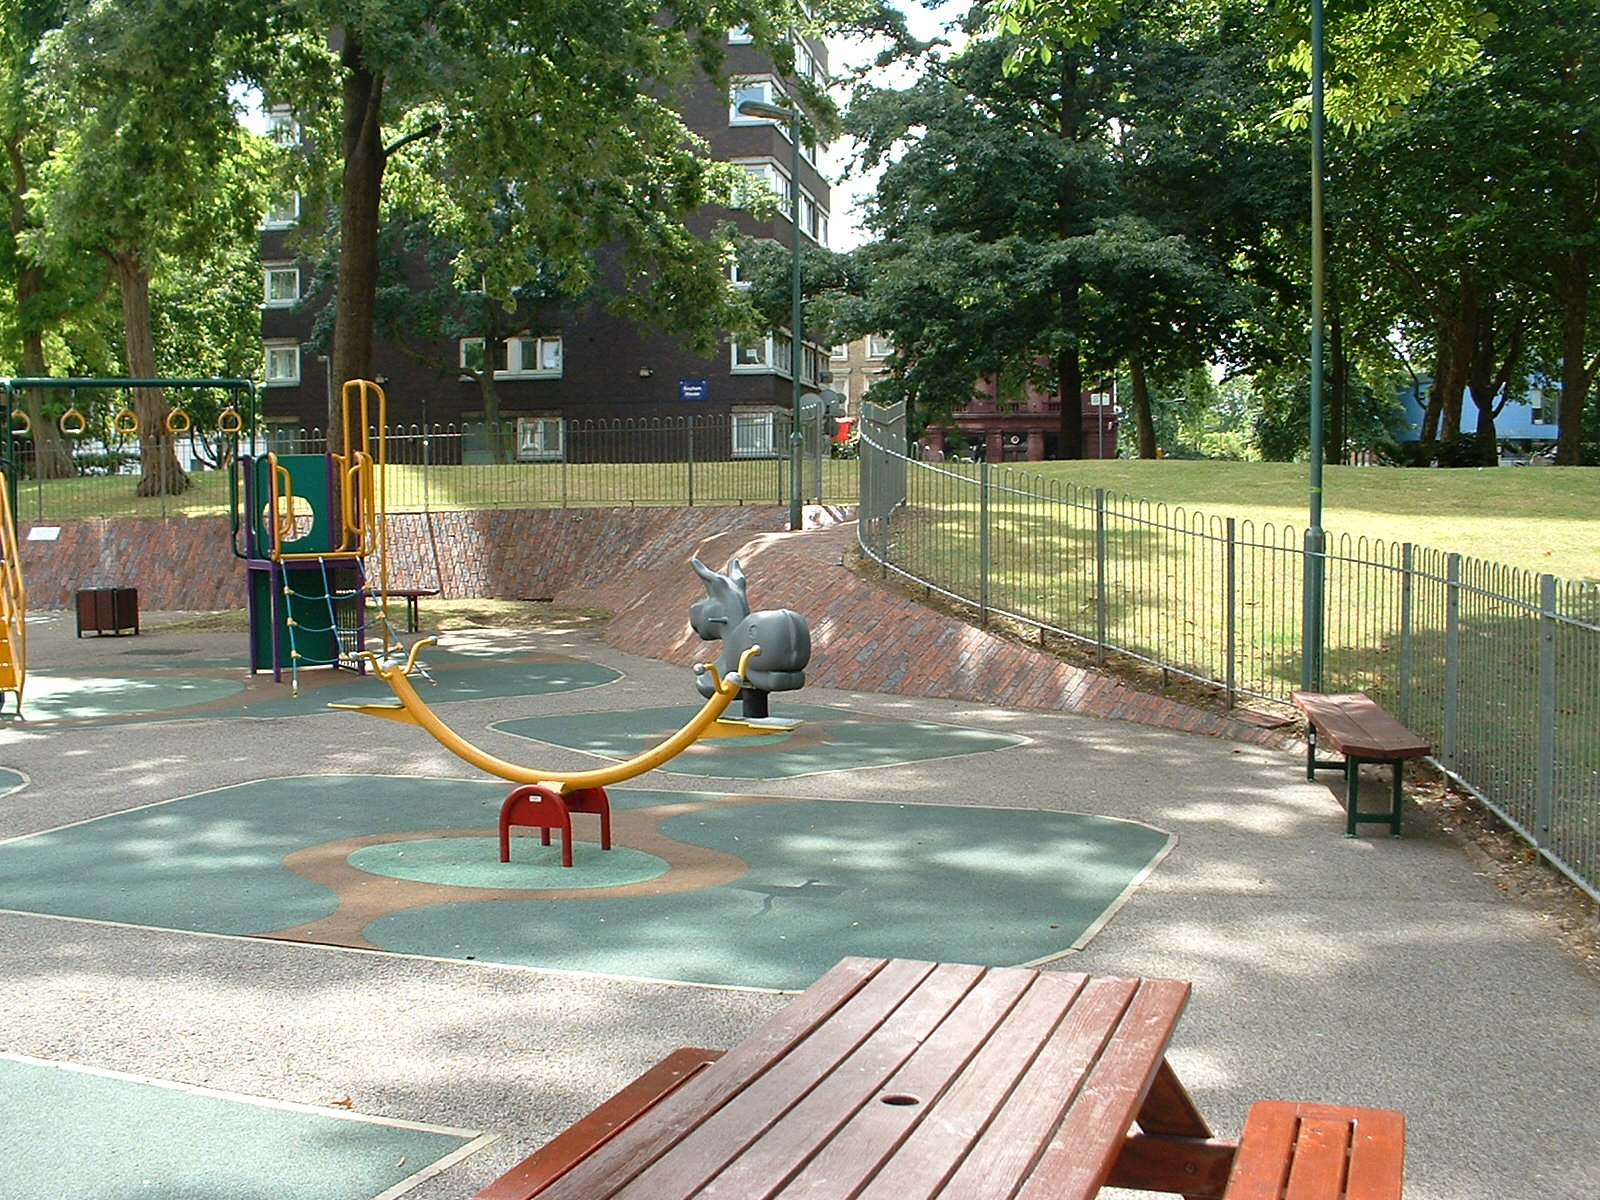 Photograph of soft-surfaced children's playing area on the Brunel Estate in 2017